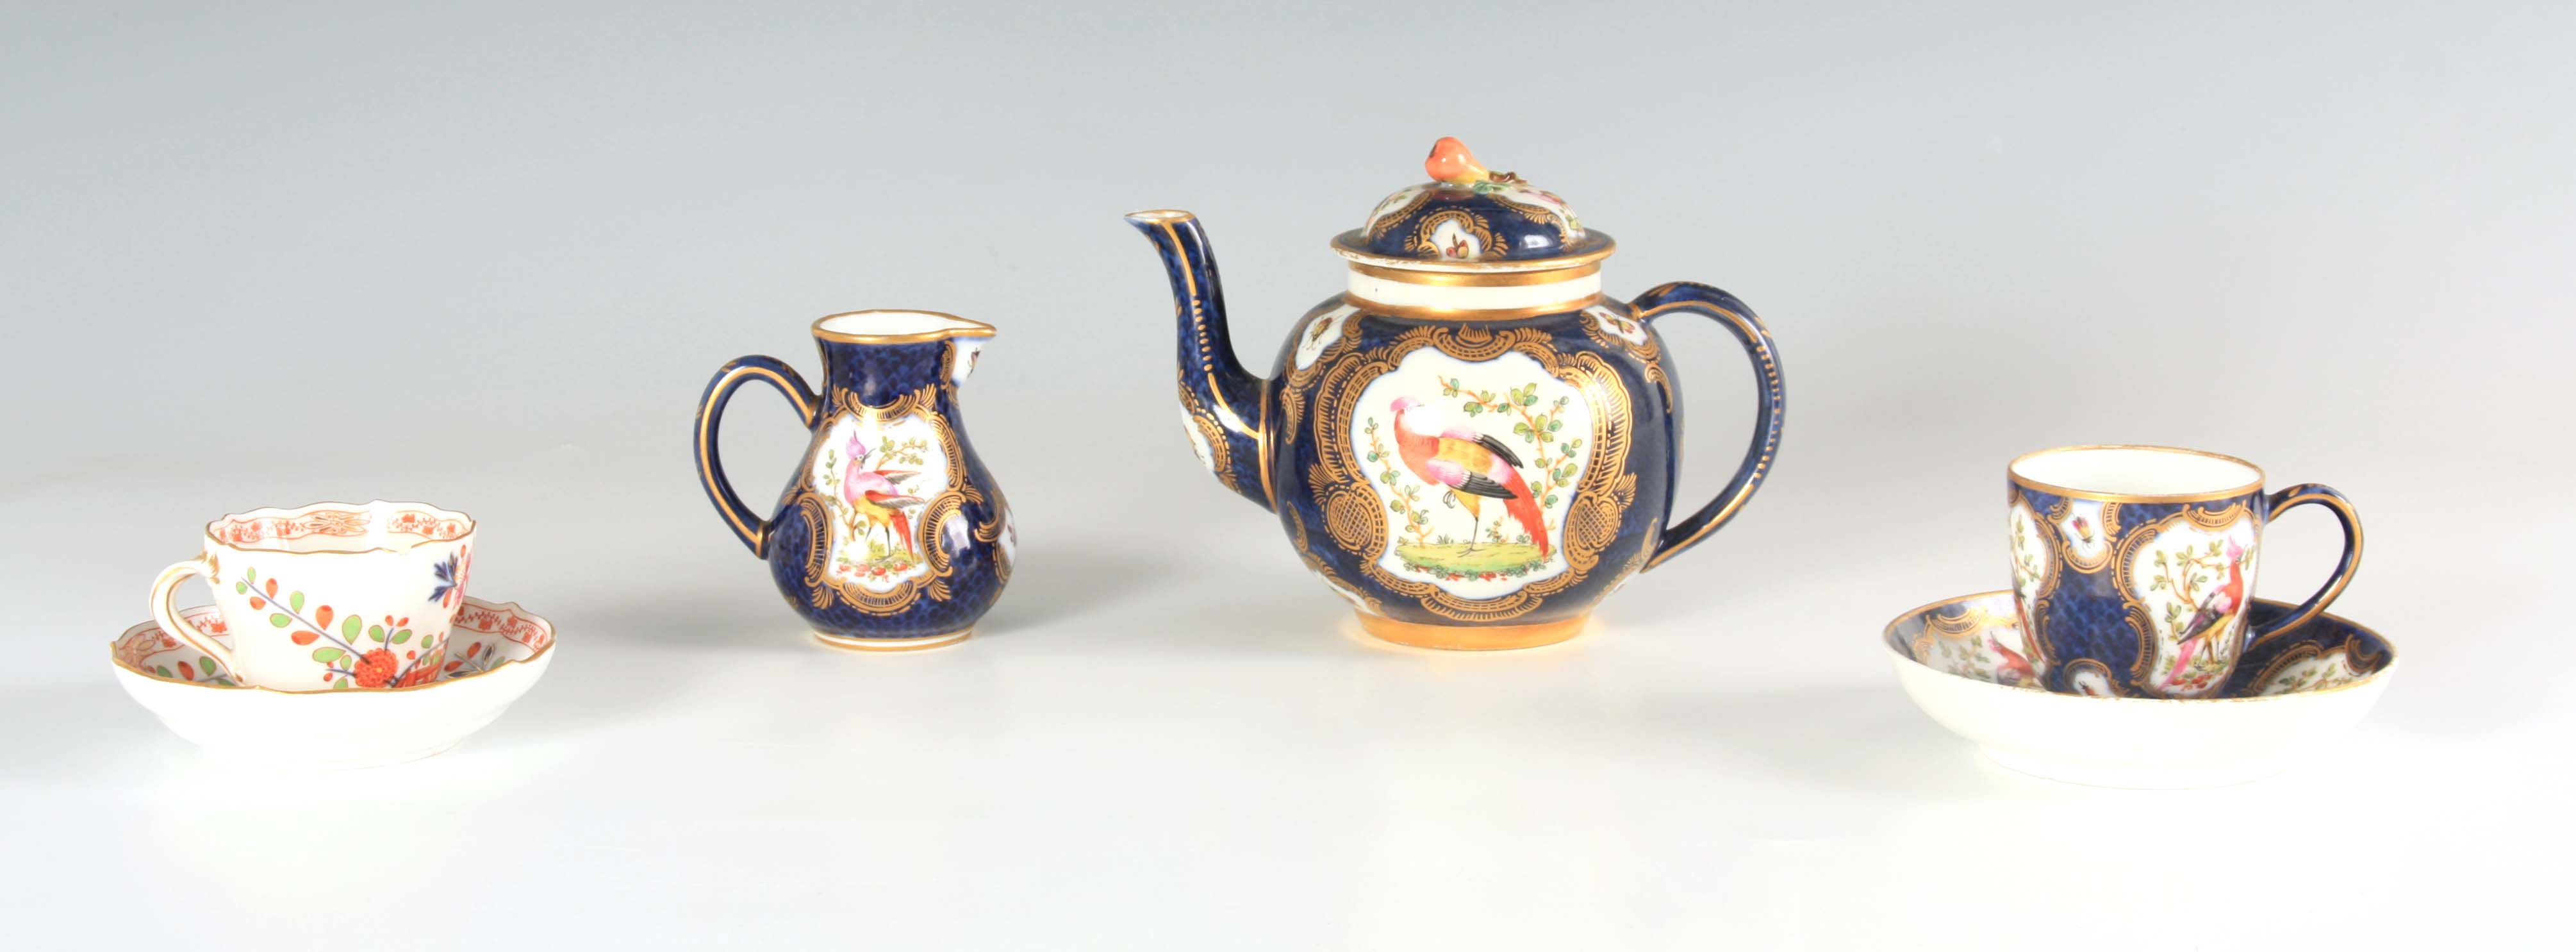 A FIRST PERIOD WORCESTER TYPE THREE PIECE SOLITAIRE SERVICE comprising a bulbous teapot with fruit